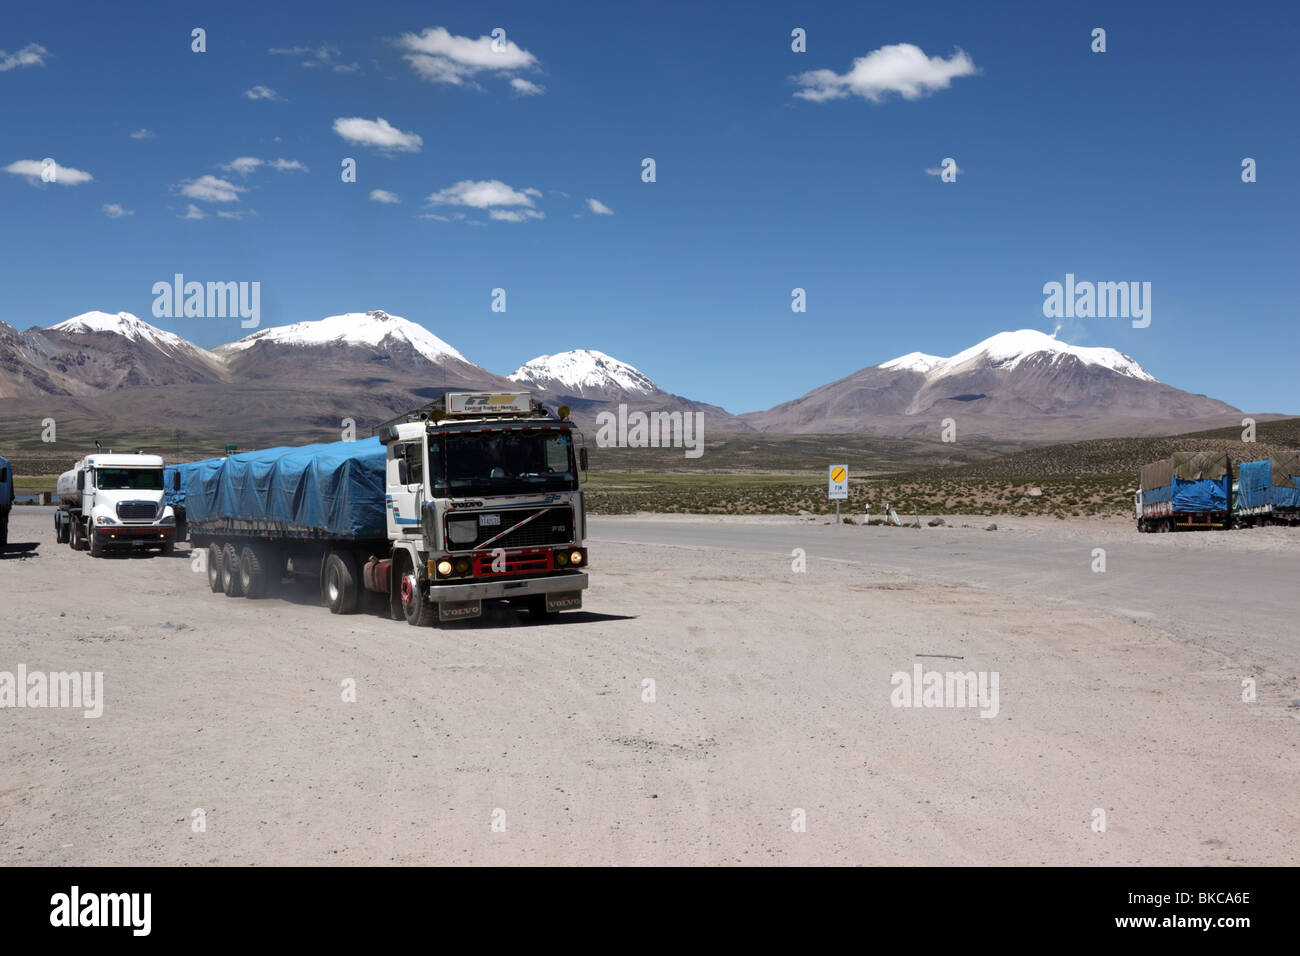 Trucks waiting at customs control on Chile side of international border at Chungara, snow capped volcanos in background, Bolivia / Chile border Stock Photo